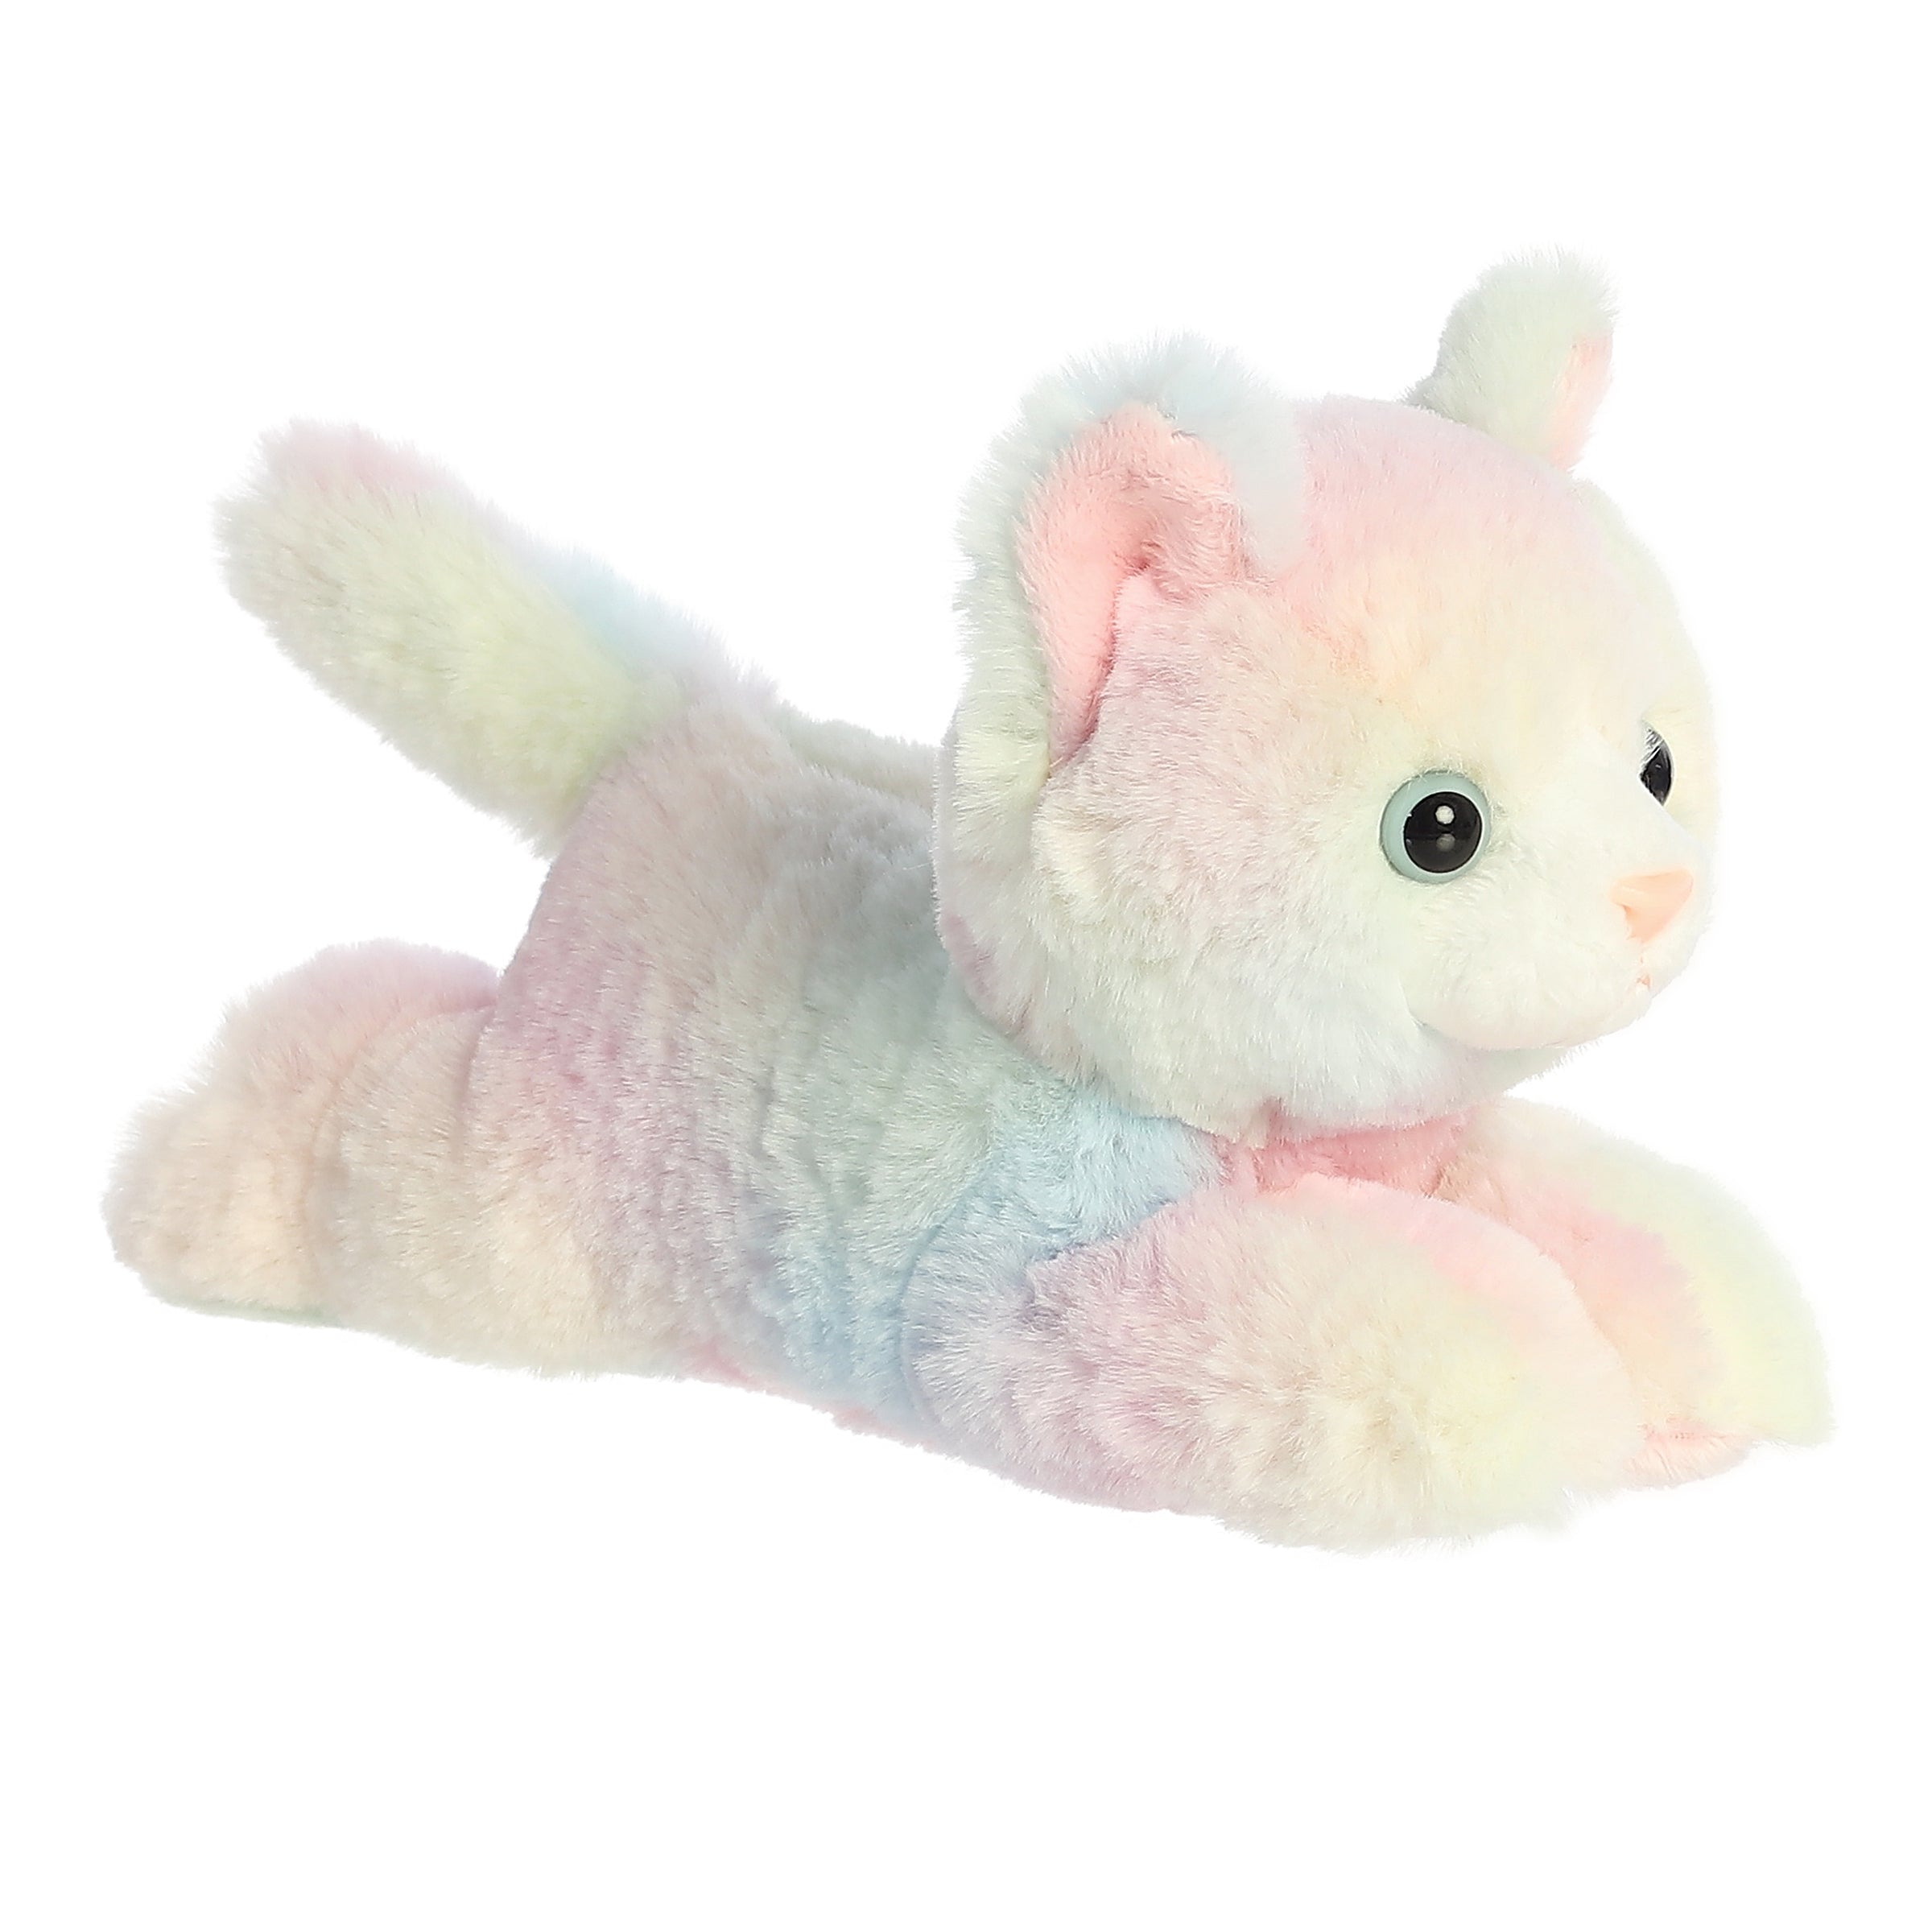 A vibrant Rainbow Kitten plush adorned with a colorful spectrum of pink, blue, and purple hues from Mini Flopsie.